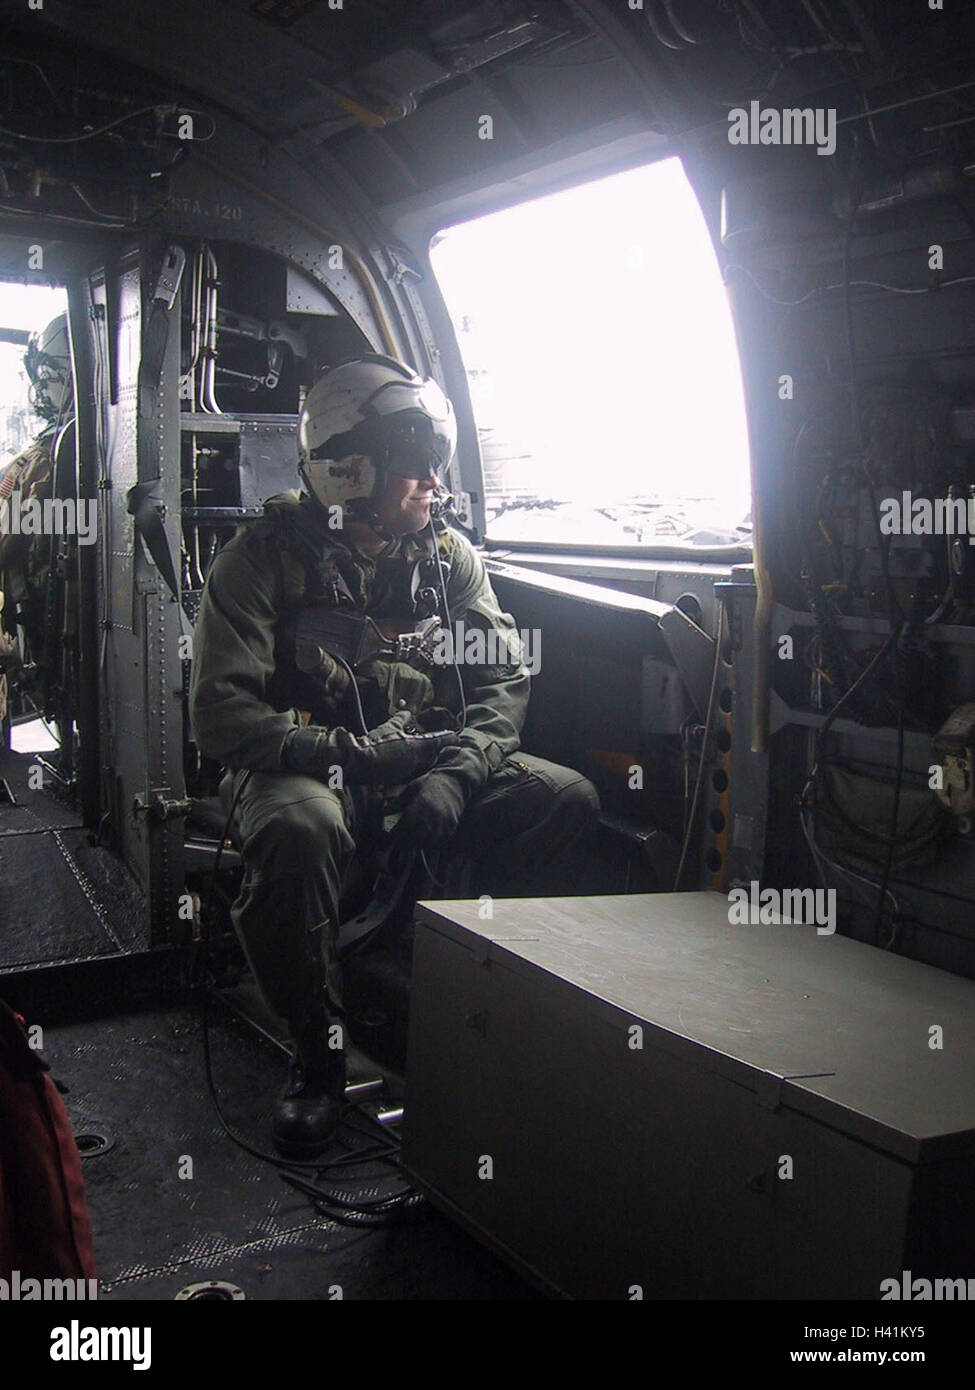 28th January 2003 During Operation Enduring Freedom, a naval aircrewman sits at the side door of a U.S. Navy Sea Knight helicopter. Stock Photo